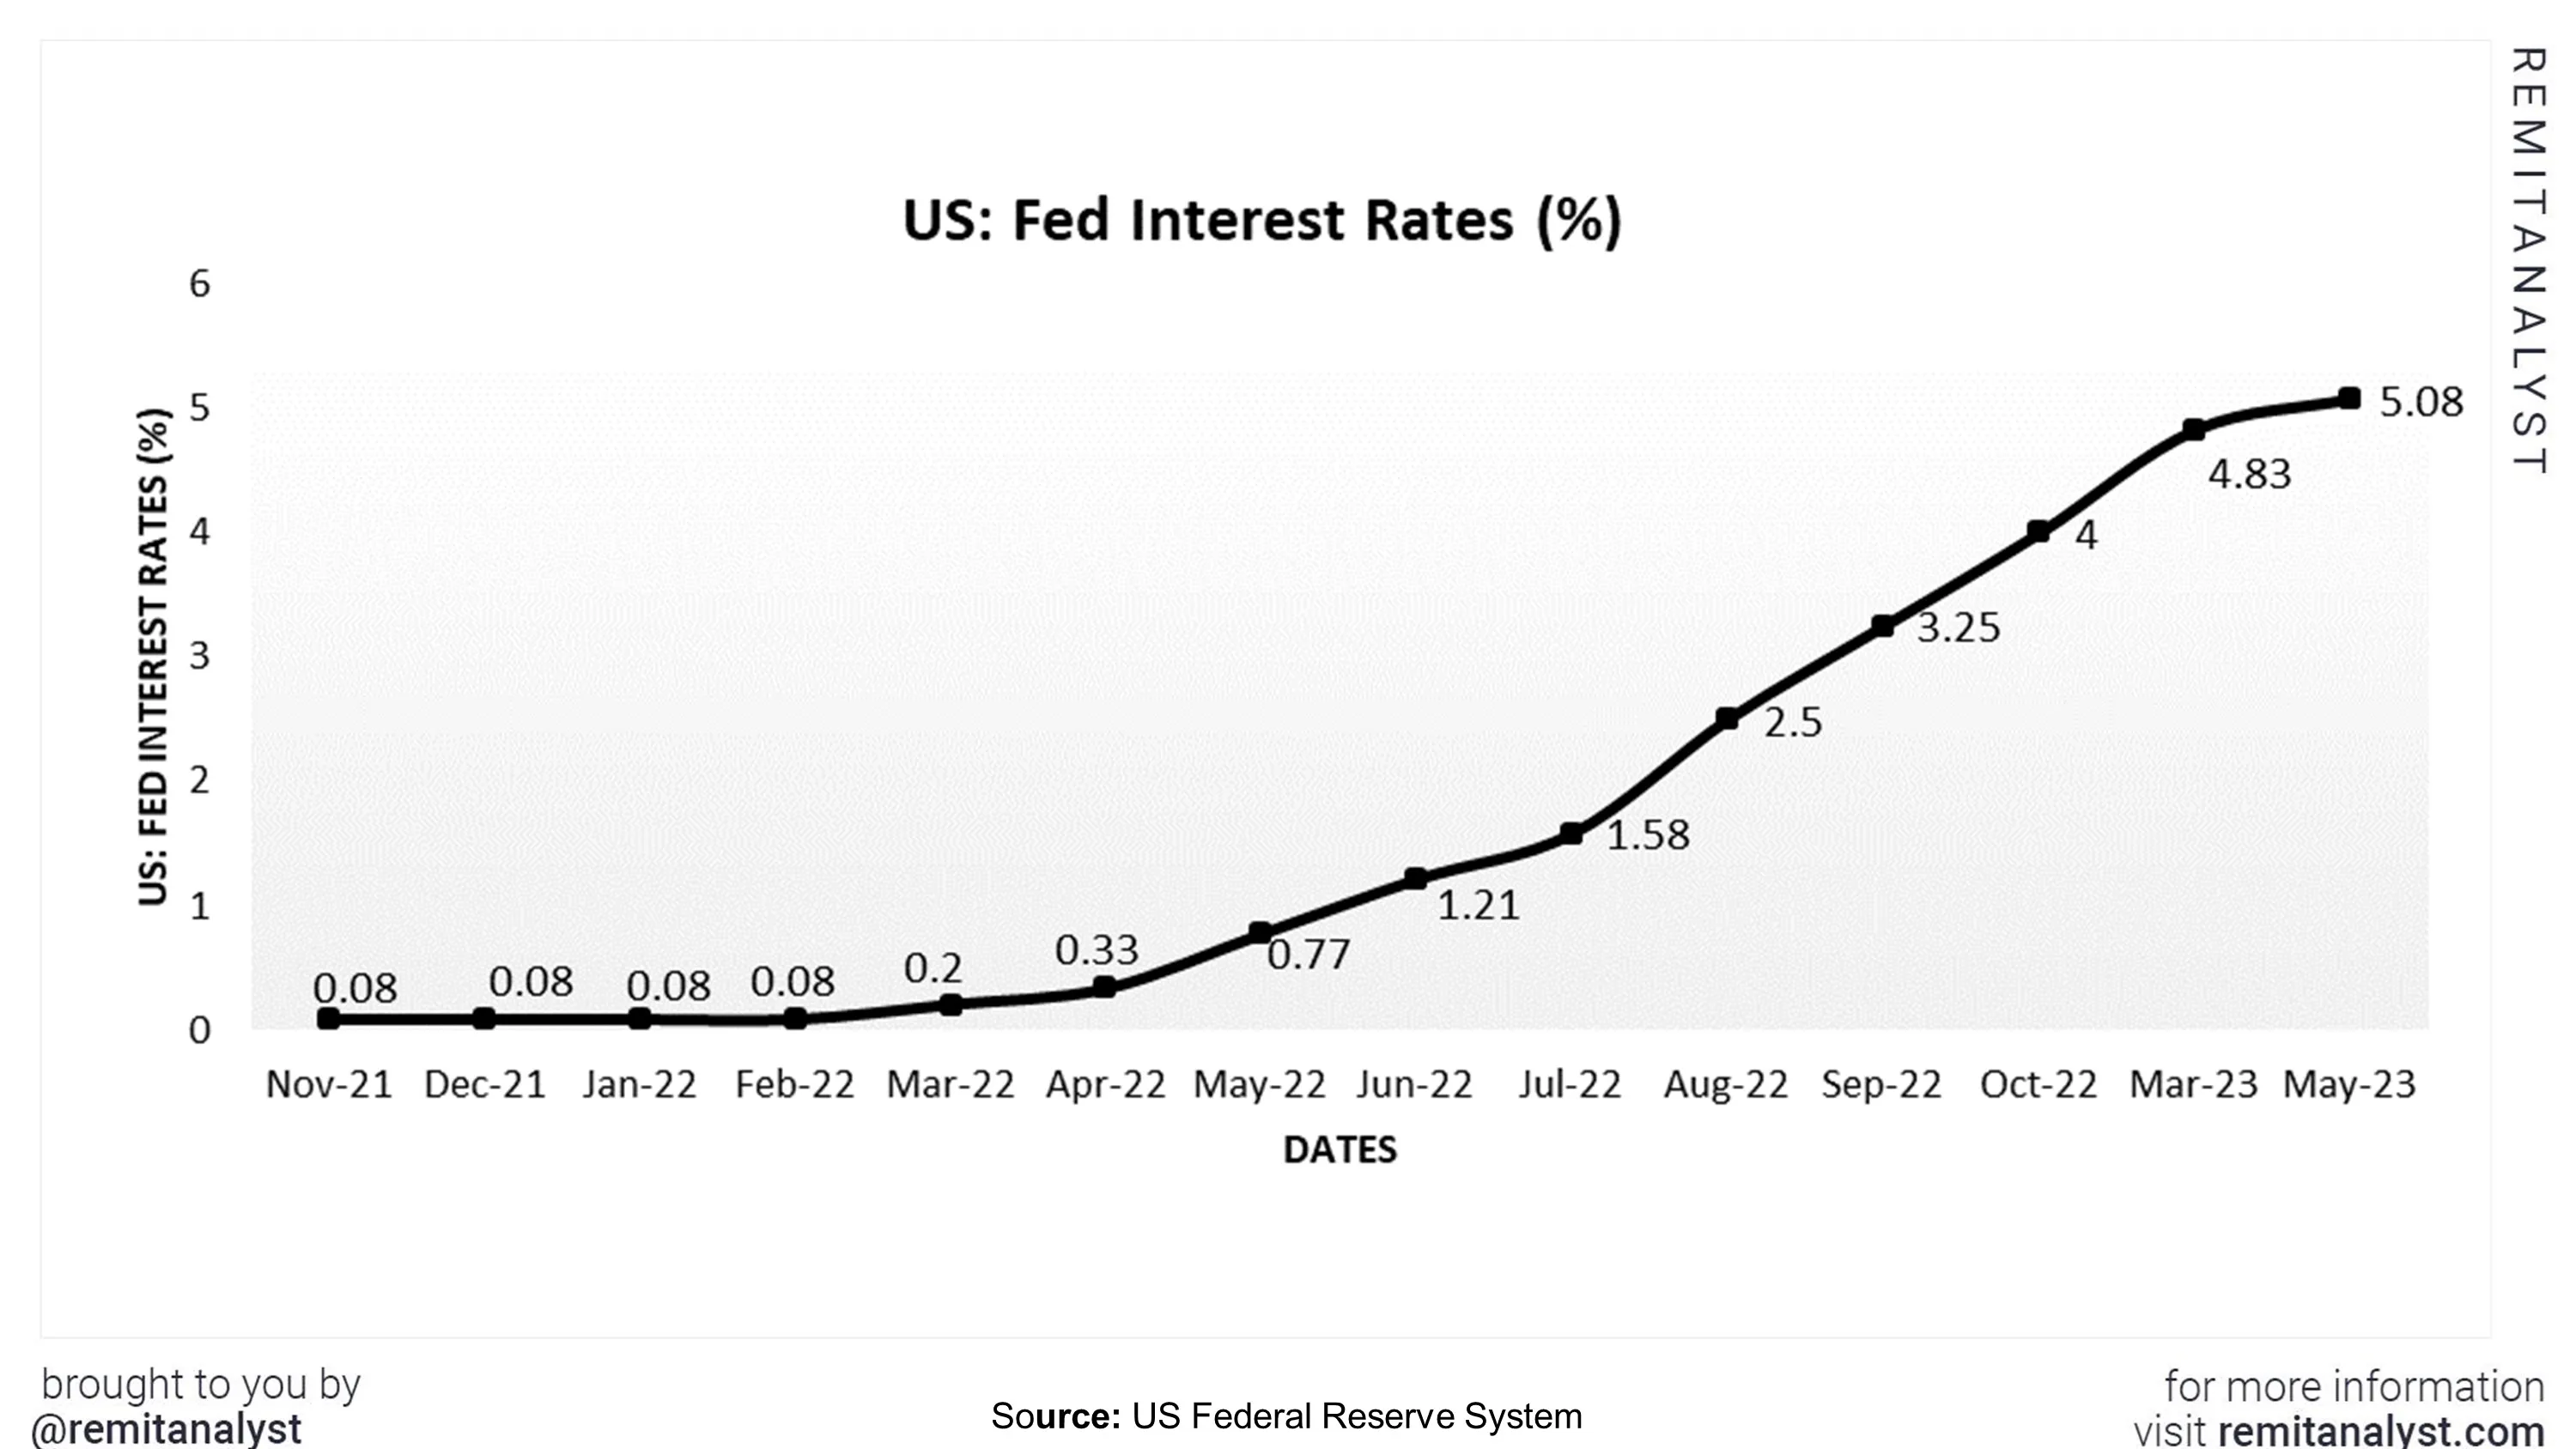 interest-rates-in-us-from-nov-2021-to-may-2023